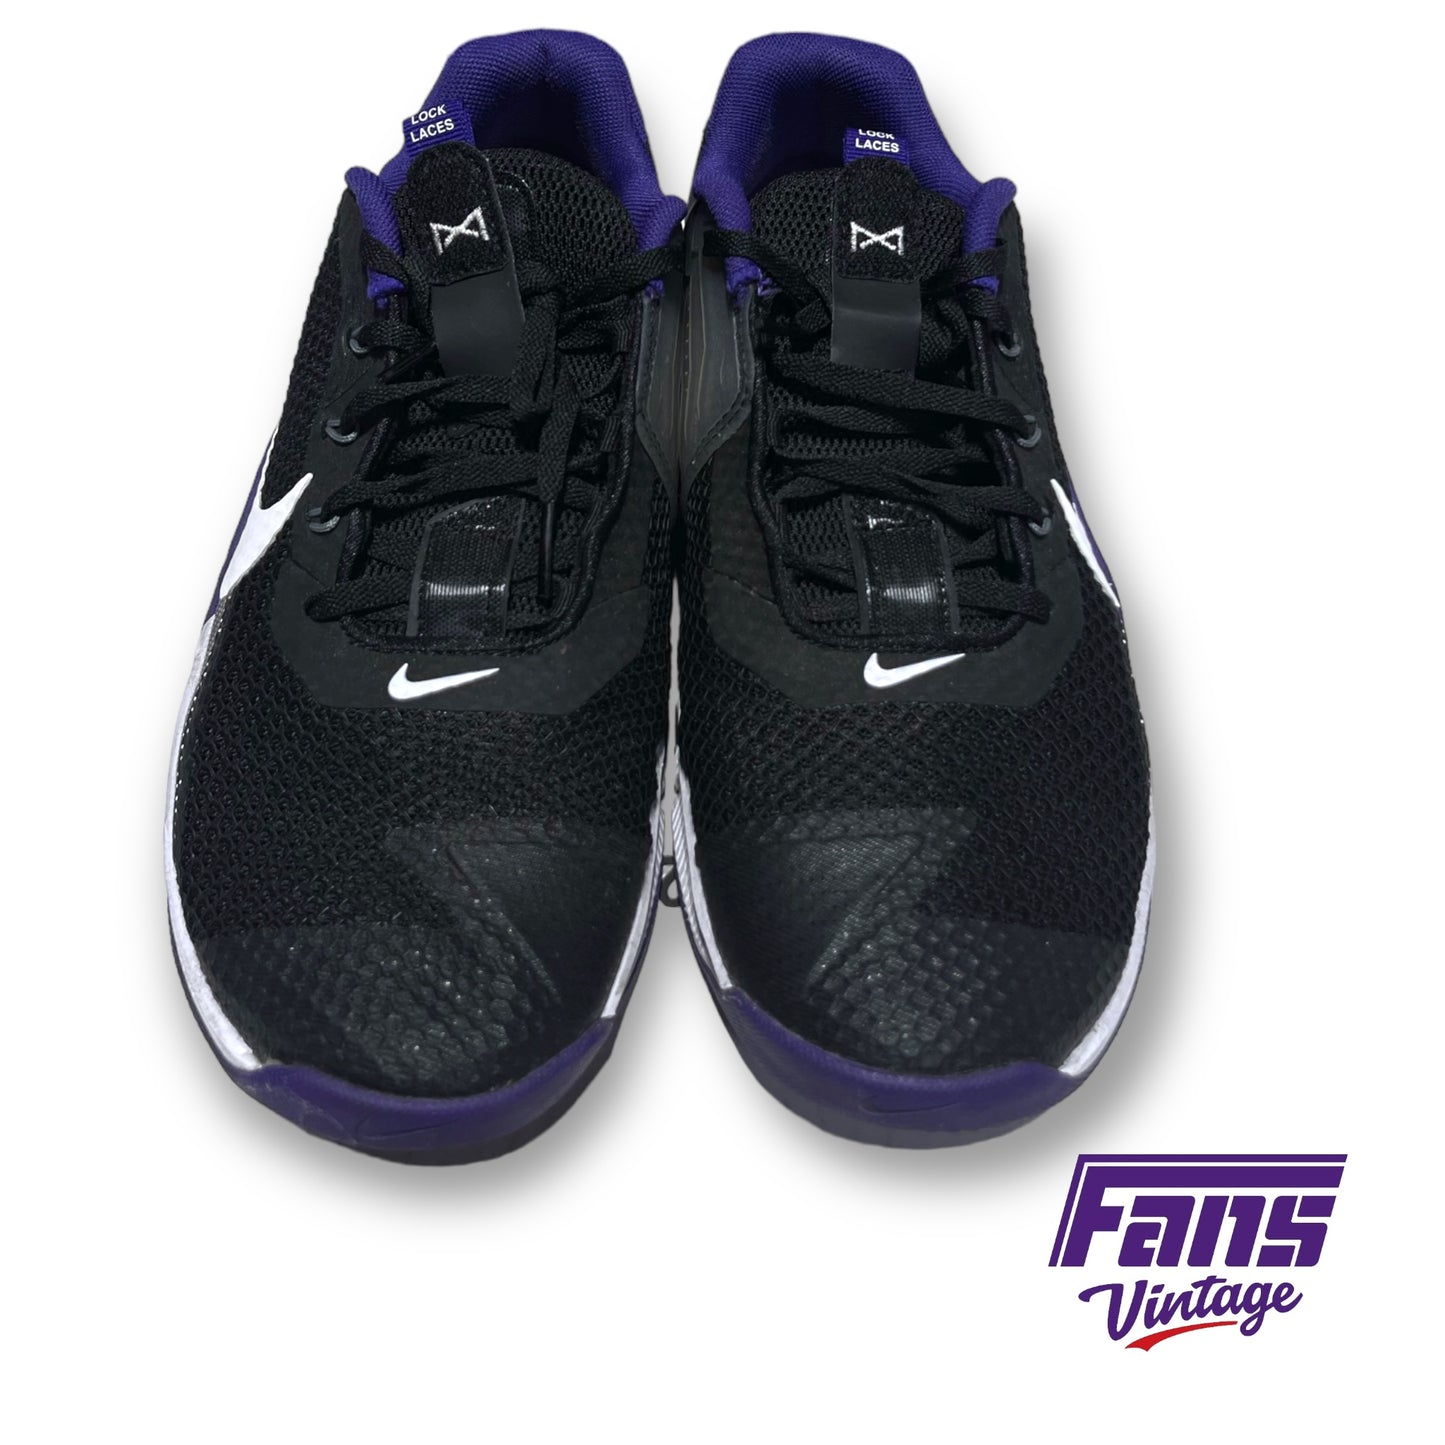 TCU Team Issue Sneakers - Nike METCON 7 Training Shoes